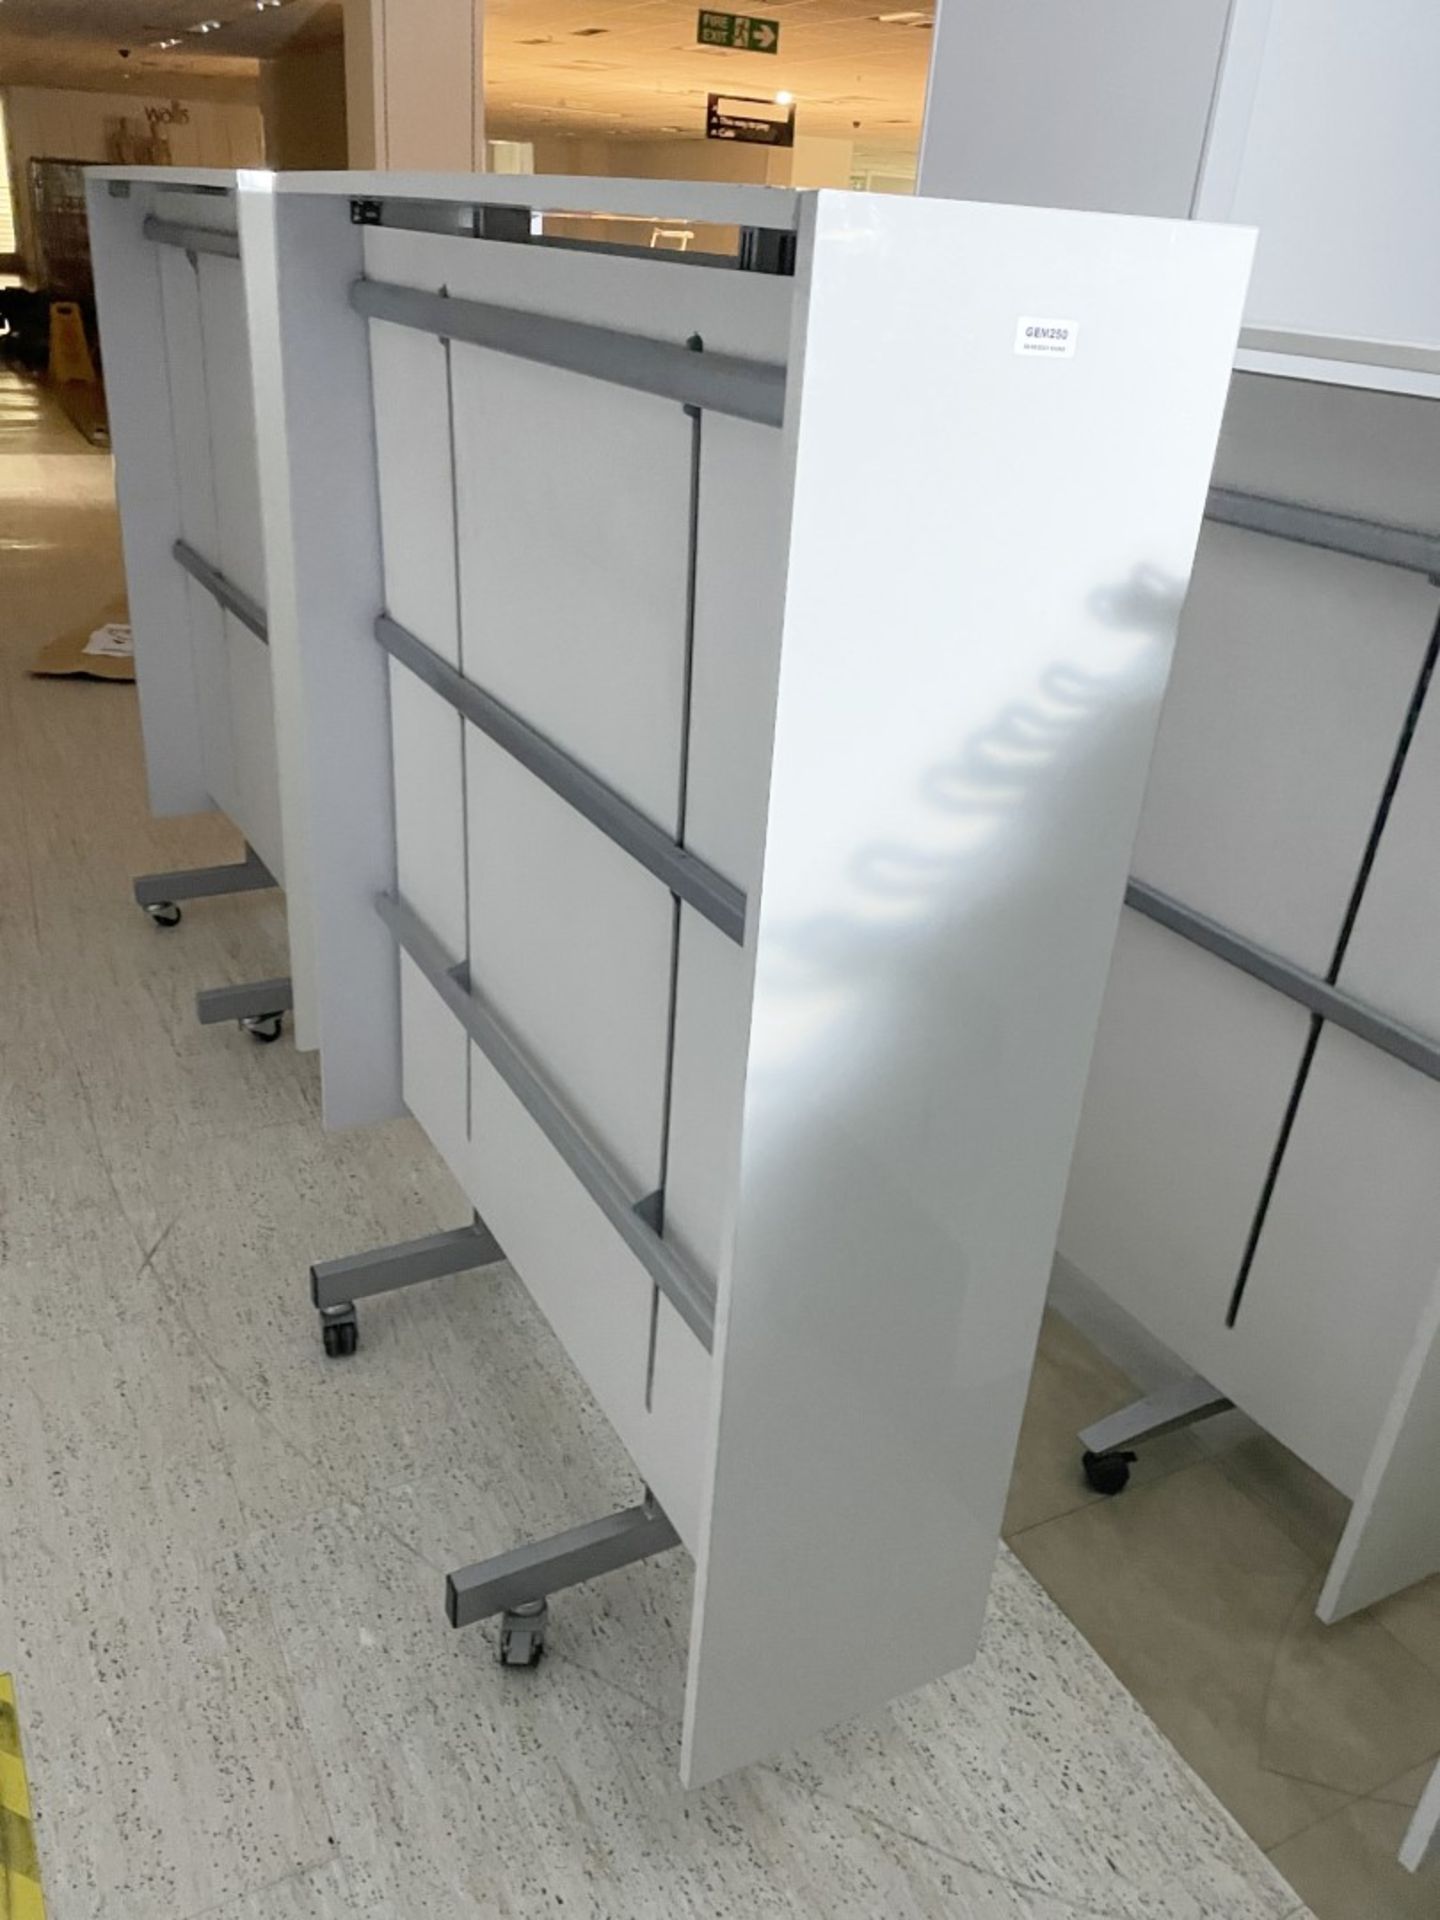 2 x Freestanding Retail Clothes Display Stands - CL670 - Ref: GEM250 - Location: Gravesend, DA11 - Image 4 of 4